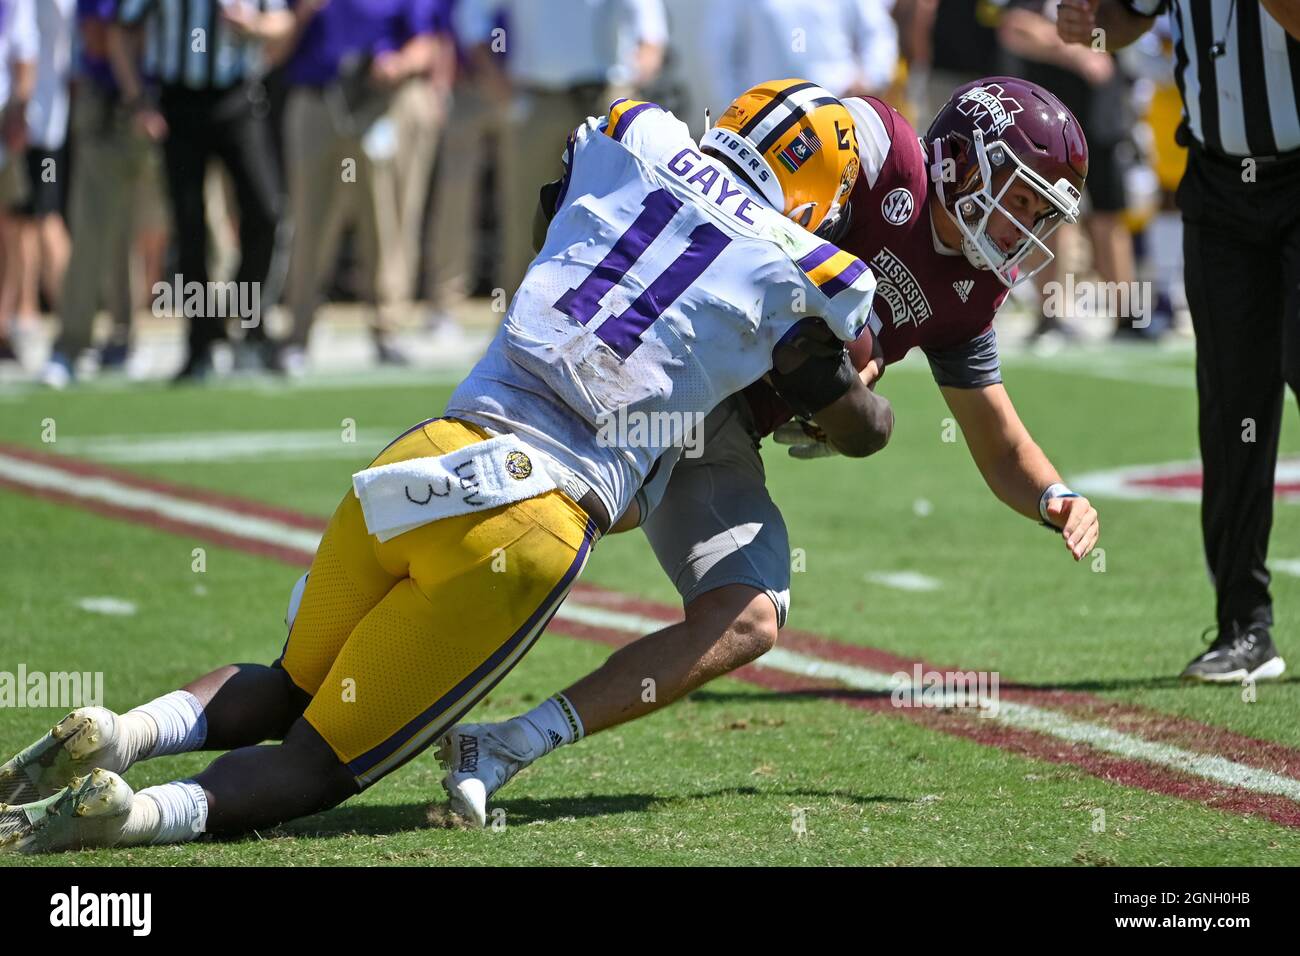 Starkville, MS, USA. 25th Sep, 2021. Mississippi State Bulldogs quarterback Will Rogers (2) is brought down by LSU Tigers defensive end Ali Gaye (11) during the NCAA football game between the LSU Tigers and the Mississippi State Bulldogs at Davis Wade Stadium in Starkville, MS. Kevin Langley/CSM/Alamy Live News Stock Photo